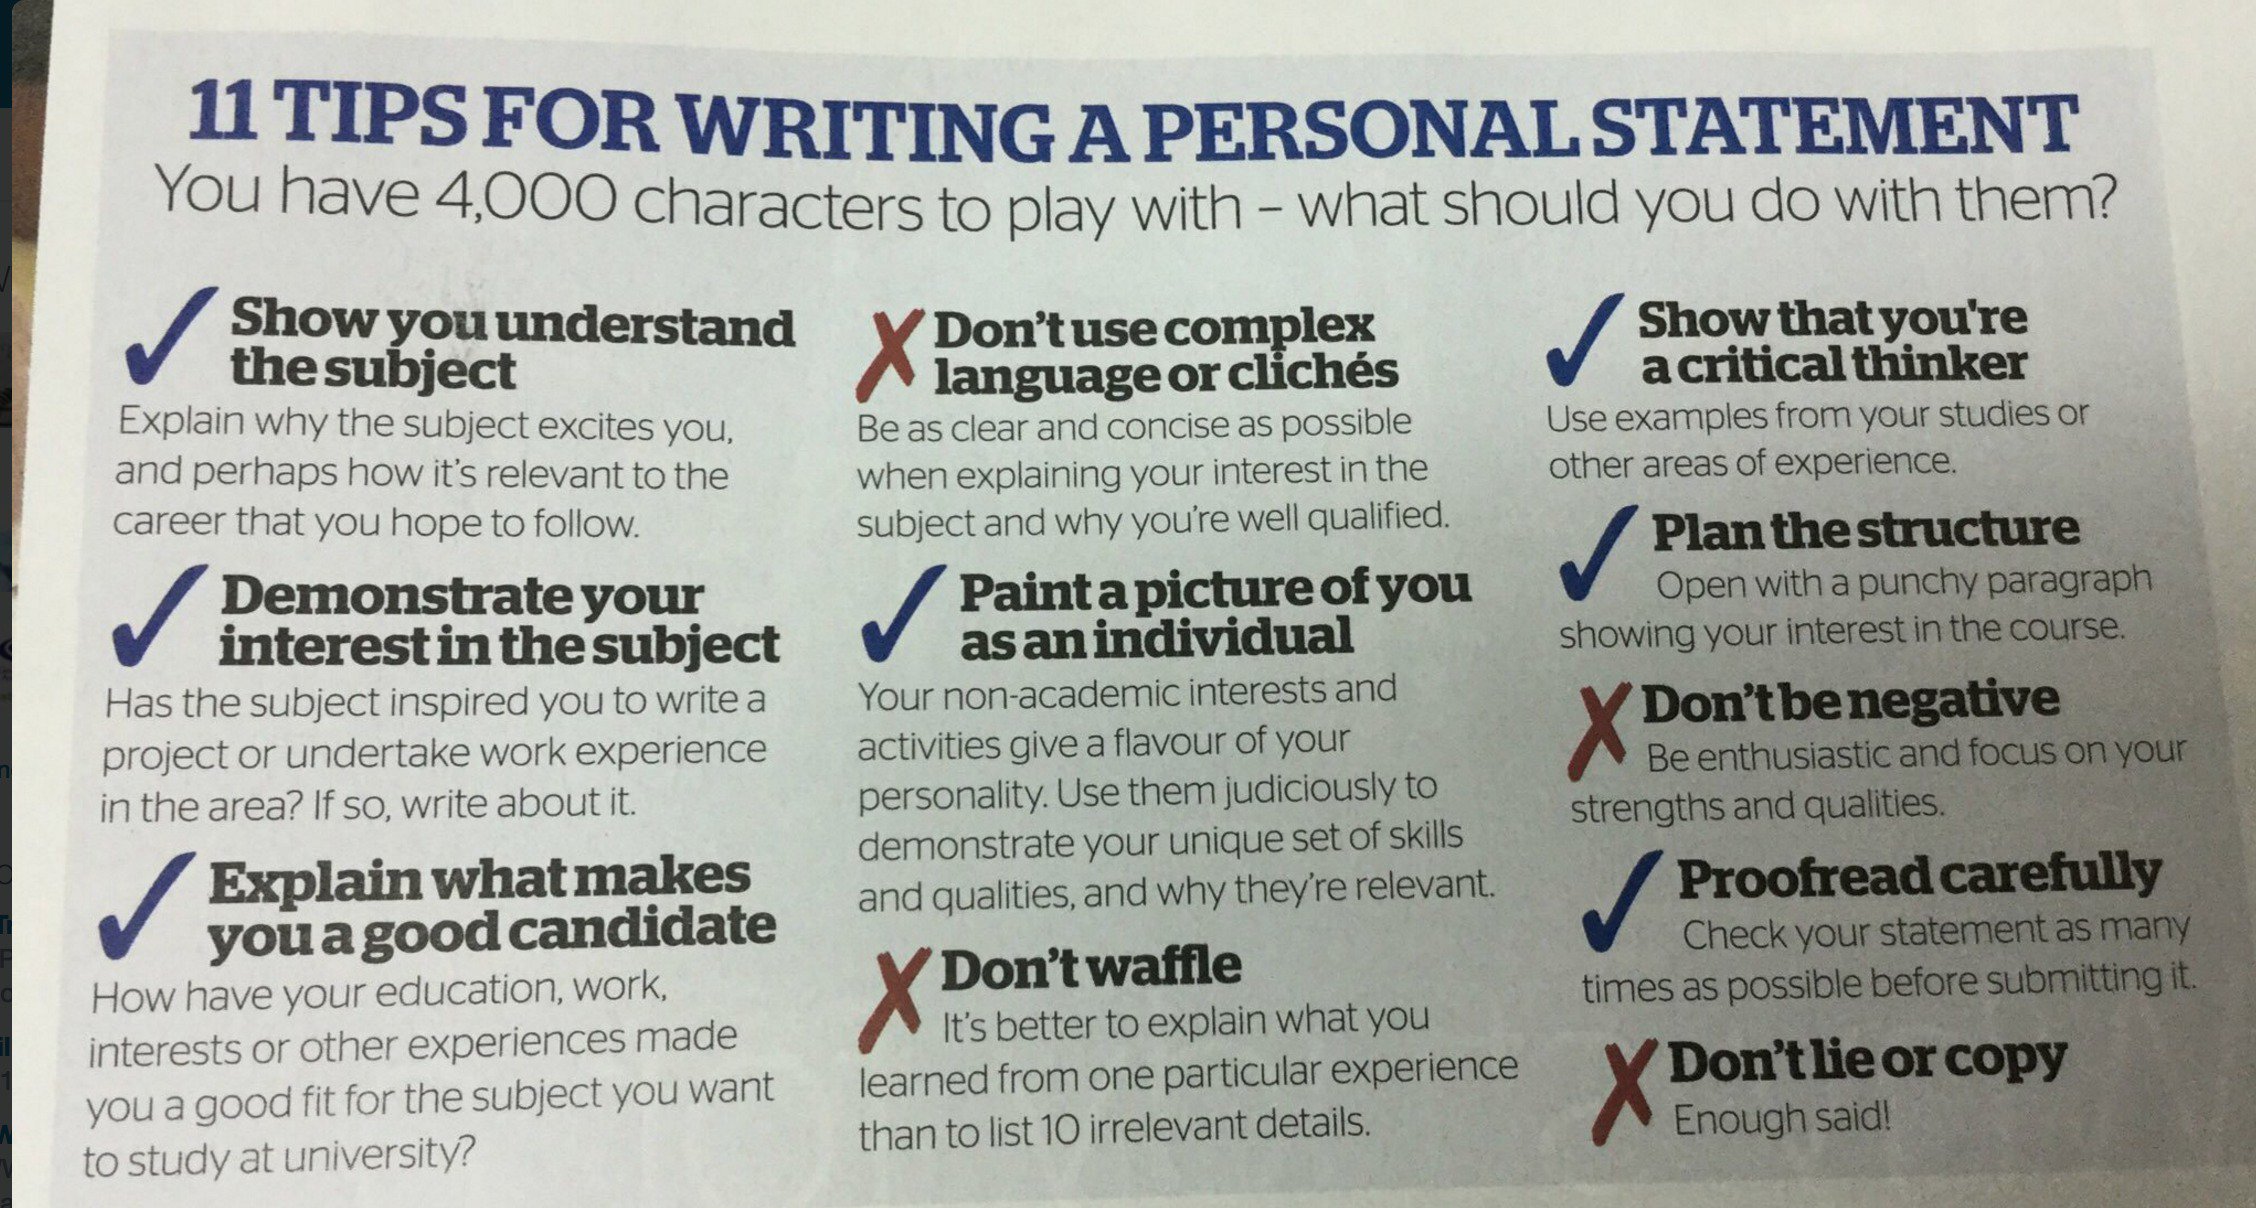 Historychappy on Twitter: "21 Tips for Writing a Personal